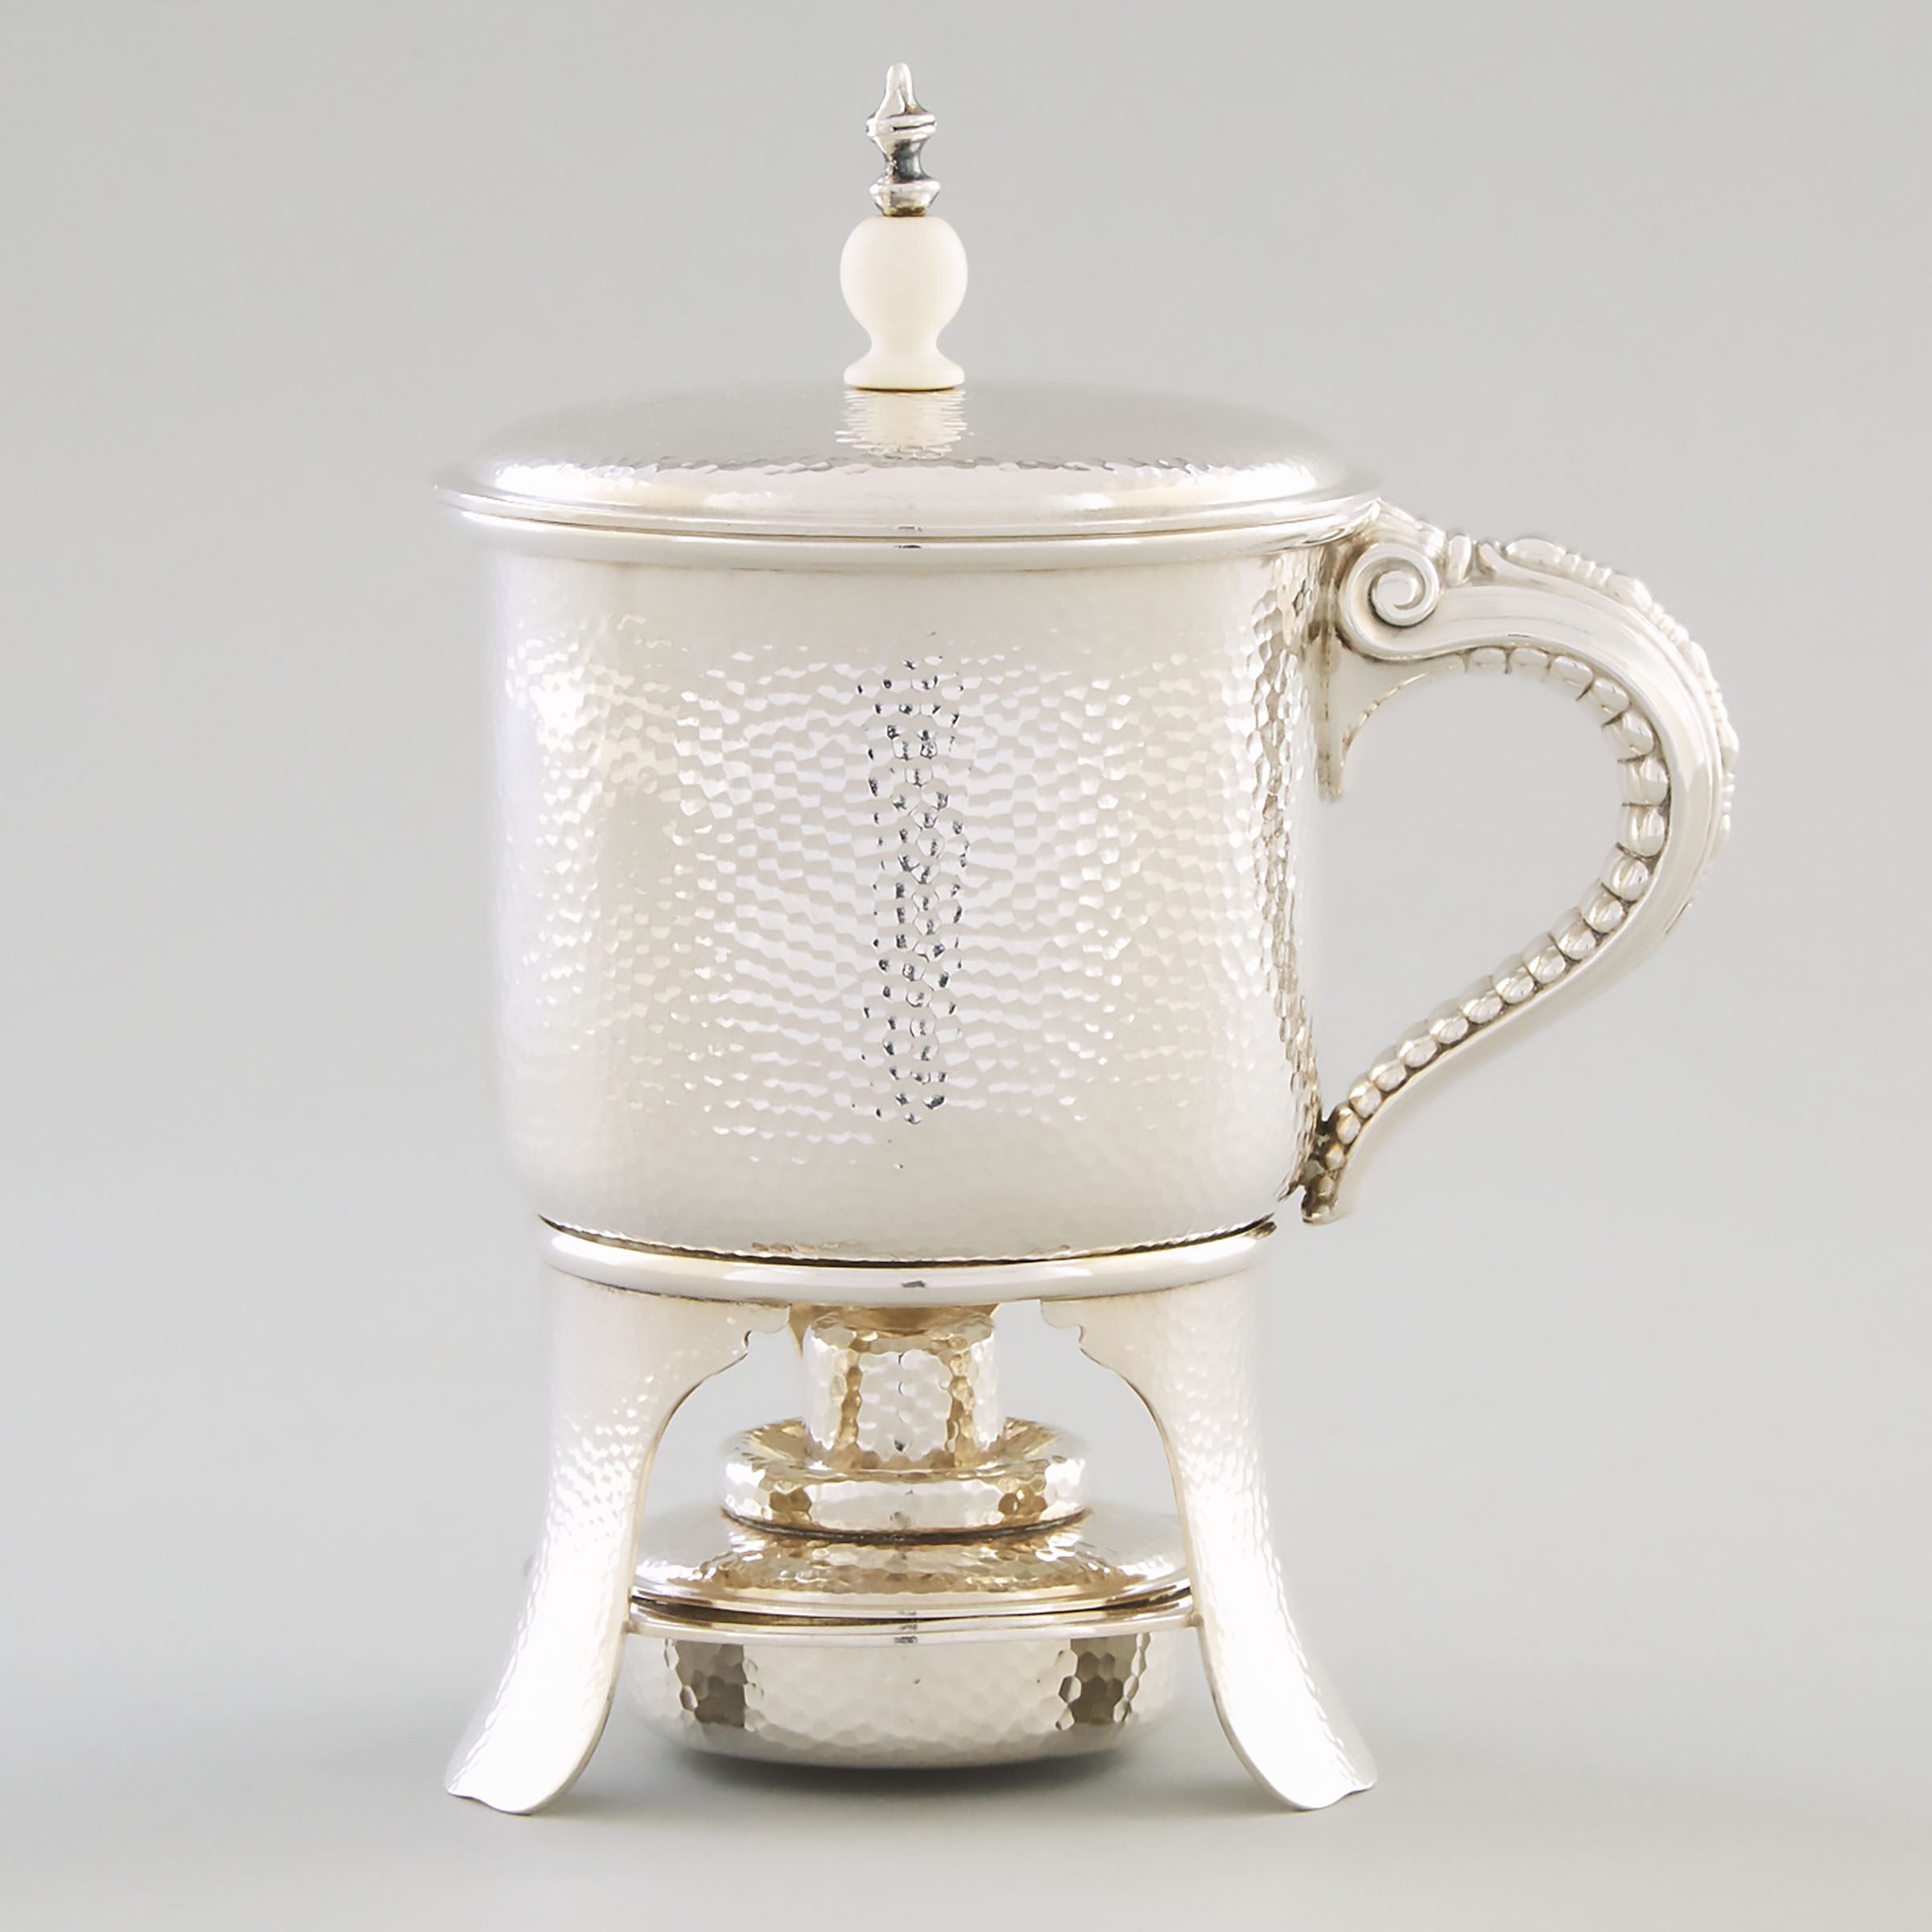 American Silver Covered Shaving Mug with Warming Stand, Gorham Mfg. Co., Providence, R.I., and Whiting Mfg. Co., New York, N.Y., 1886 and later